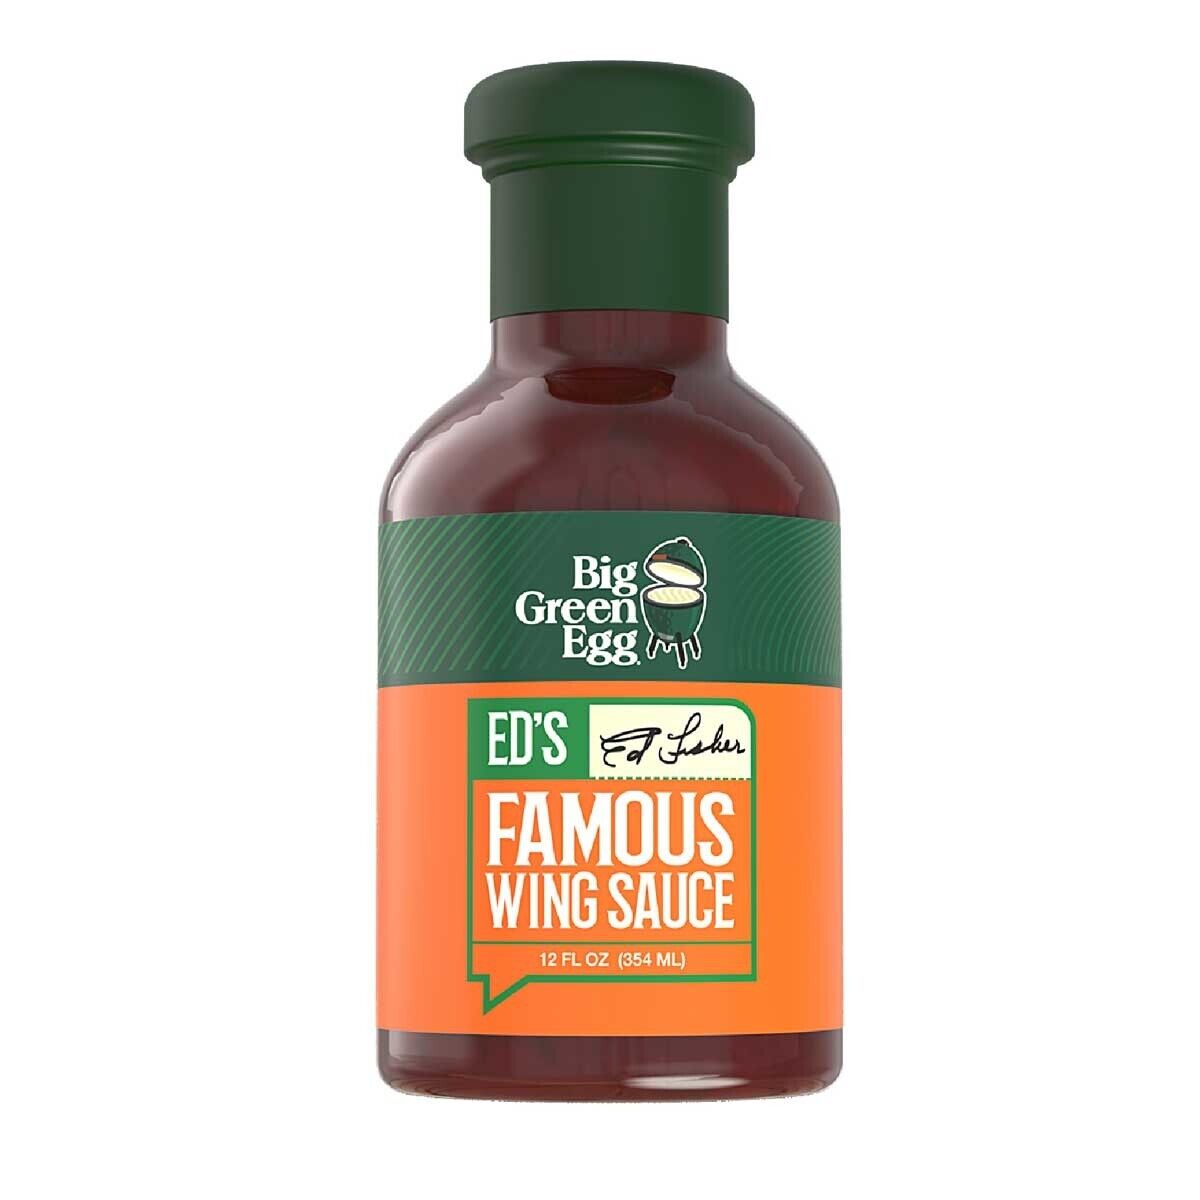 Big Green Egg Ed Fisher's Famous Wing Sauce